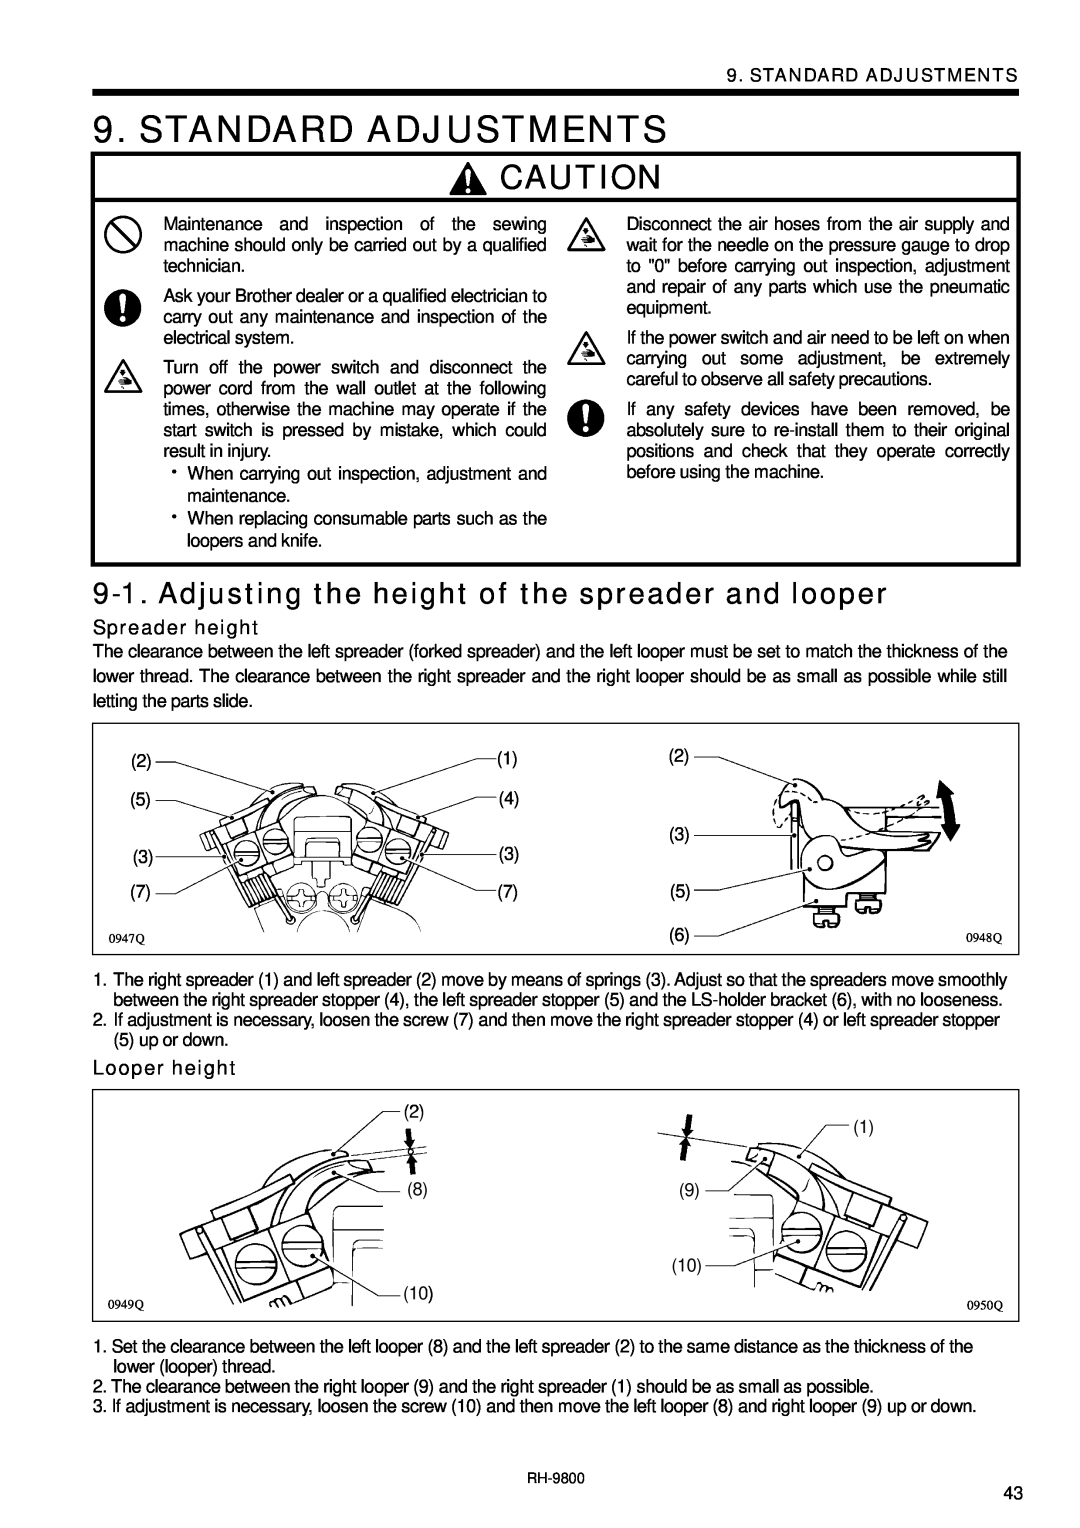 Brother DH4-B980 Standard Adjustments, Adjusting the height of the spreader and looper, Spreader height, Looper height 